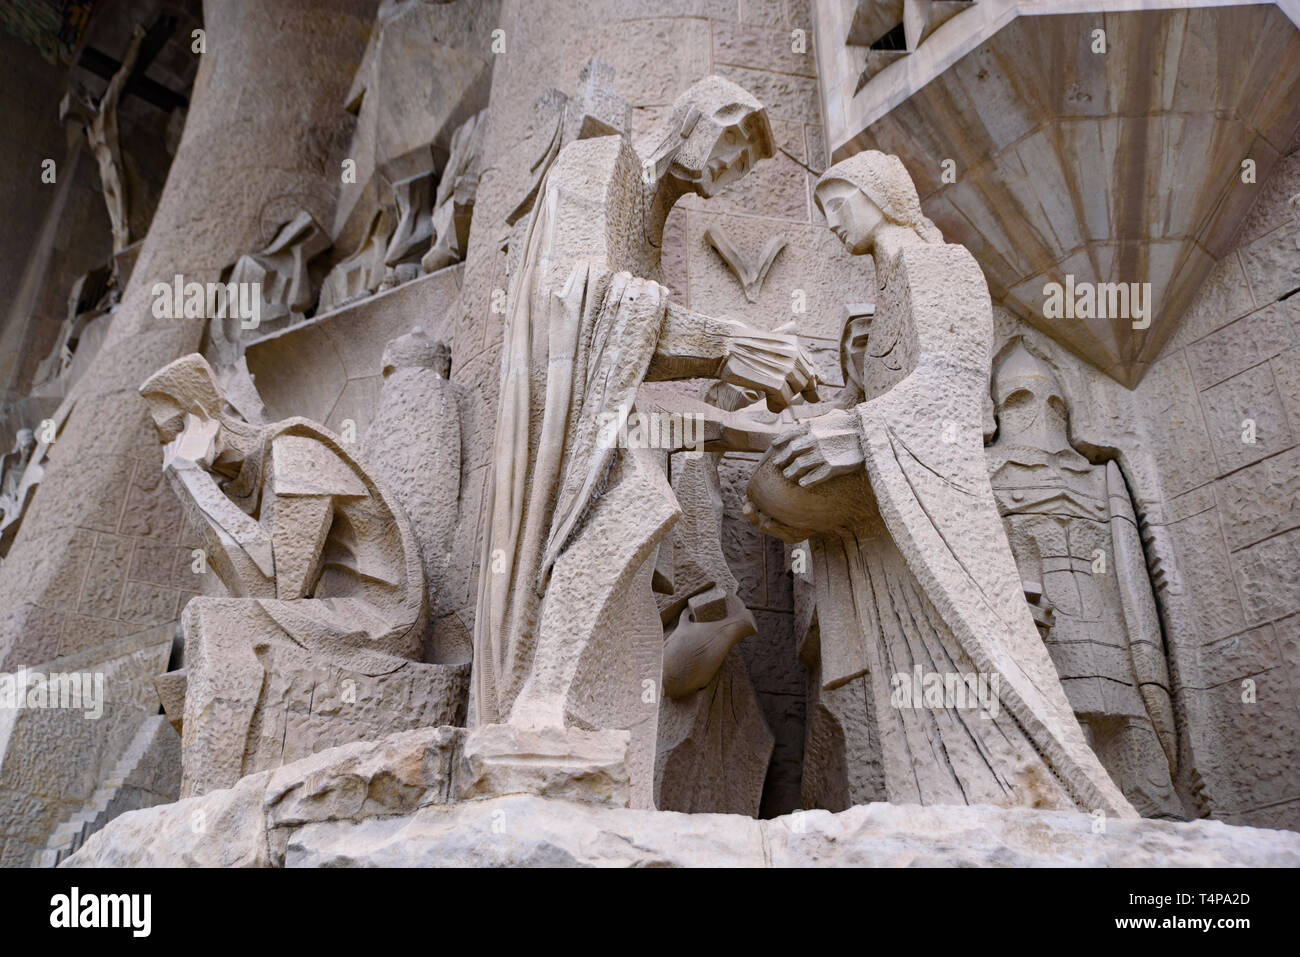 The sculptures on the Passion facade of Sagrada Familia in Barcelona, Spain Stock Photo